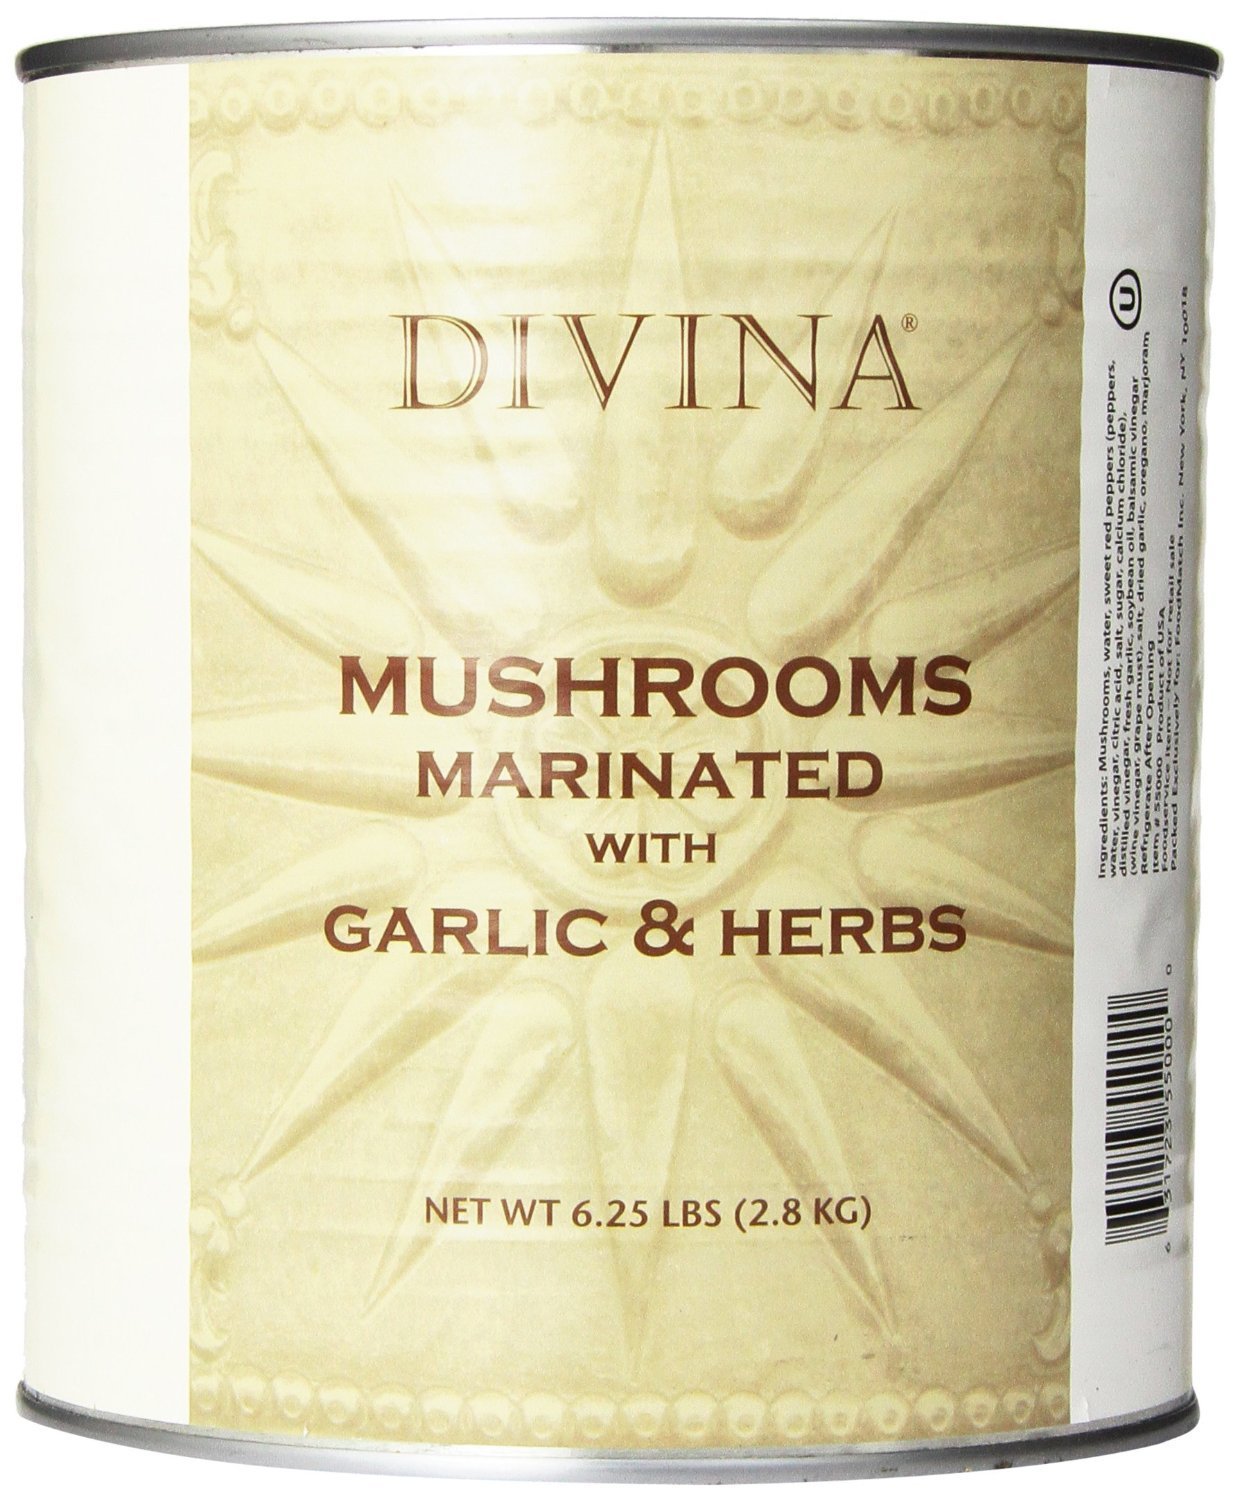 DIVINA: Mushrooms Marinated with Garlic & Herbs, 6.25 lb - Vending Business Solutions